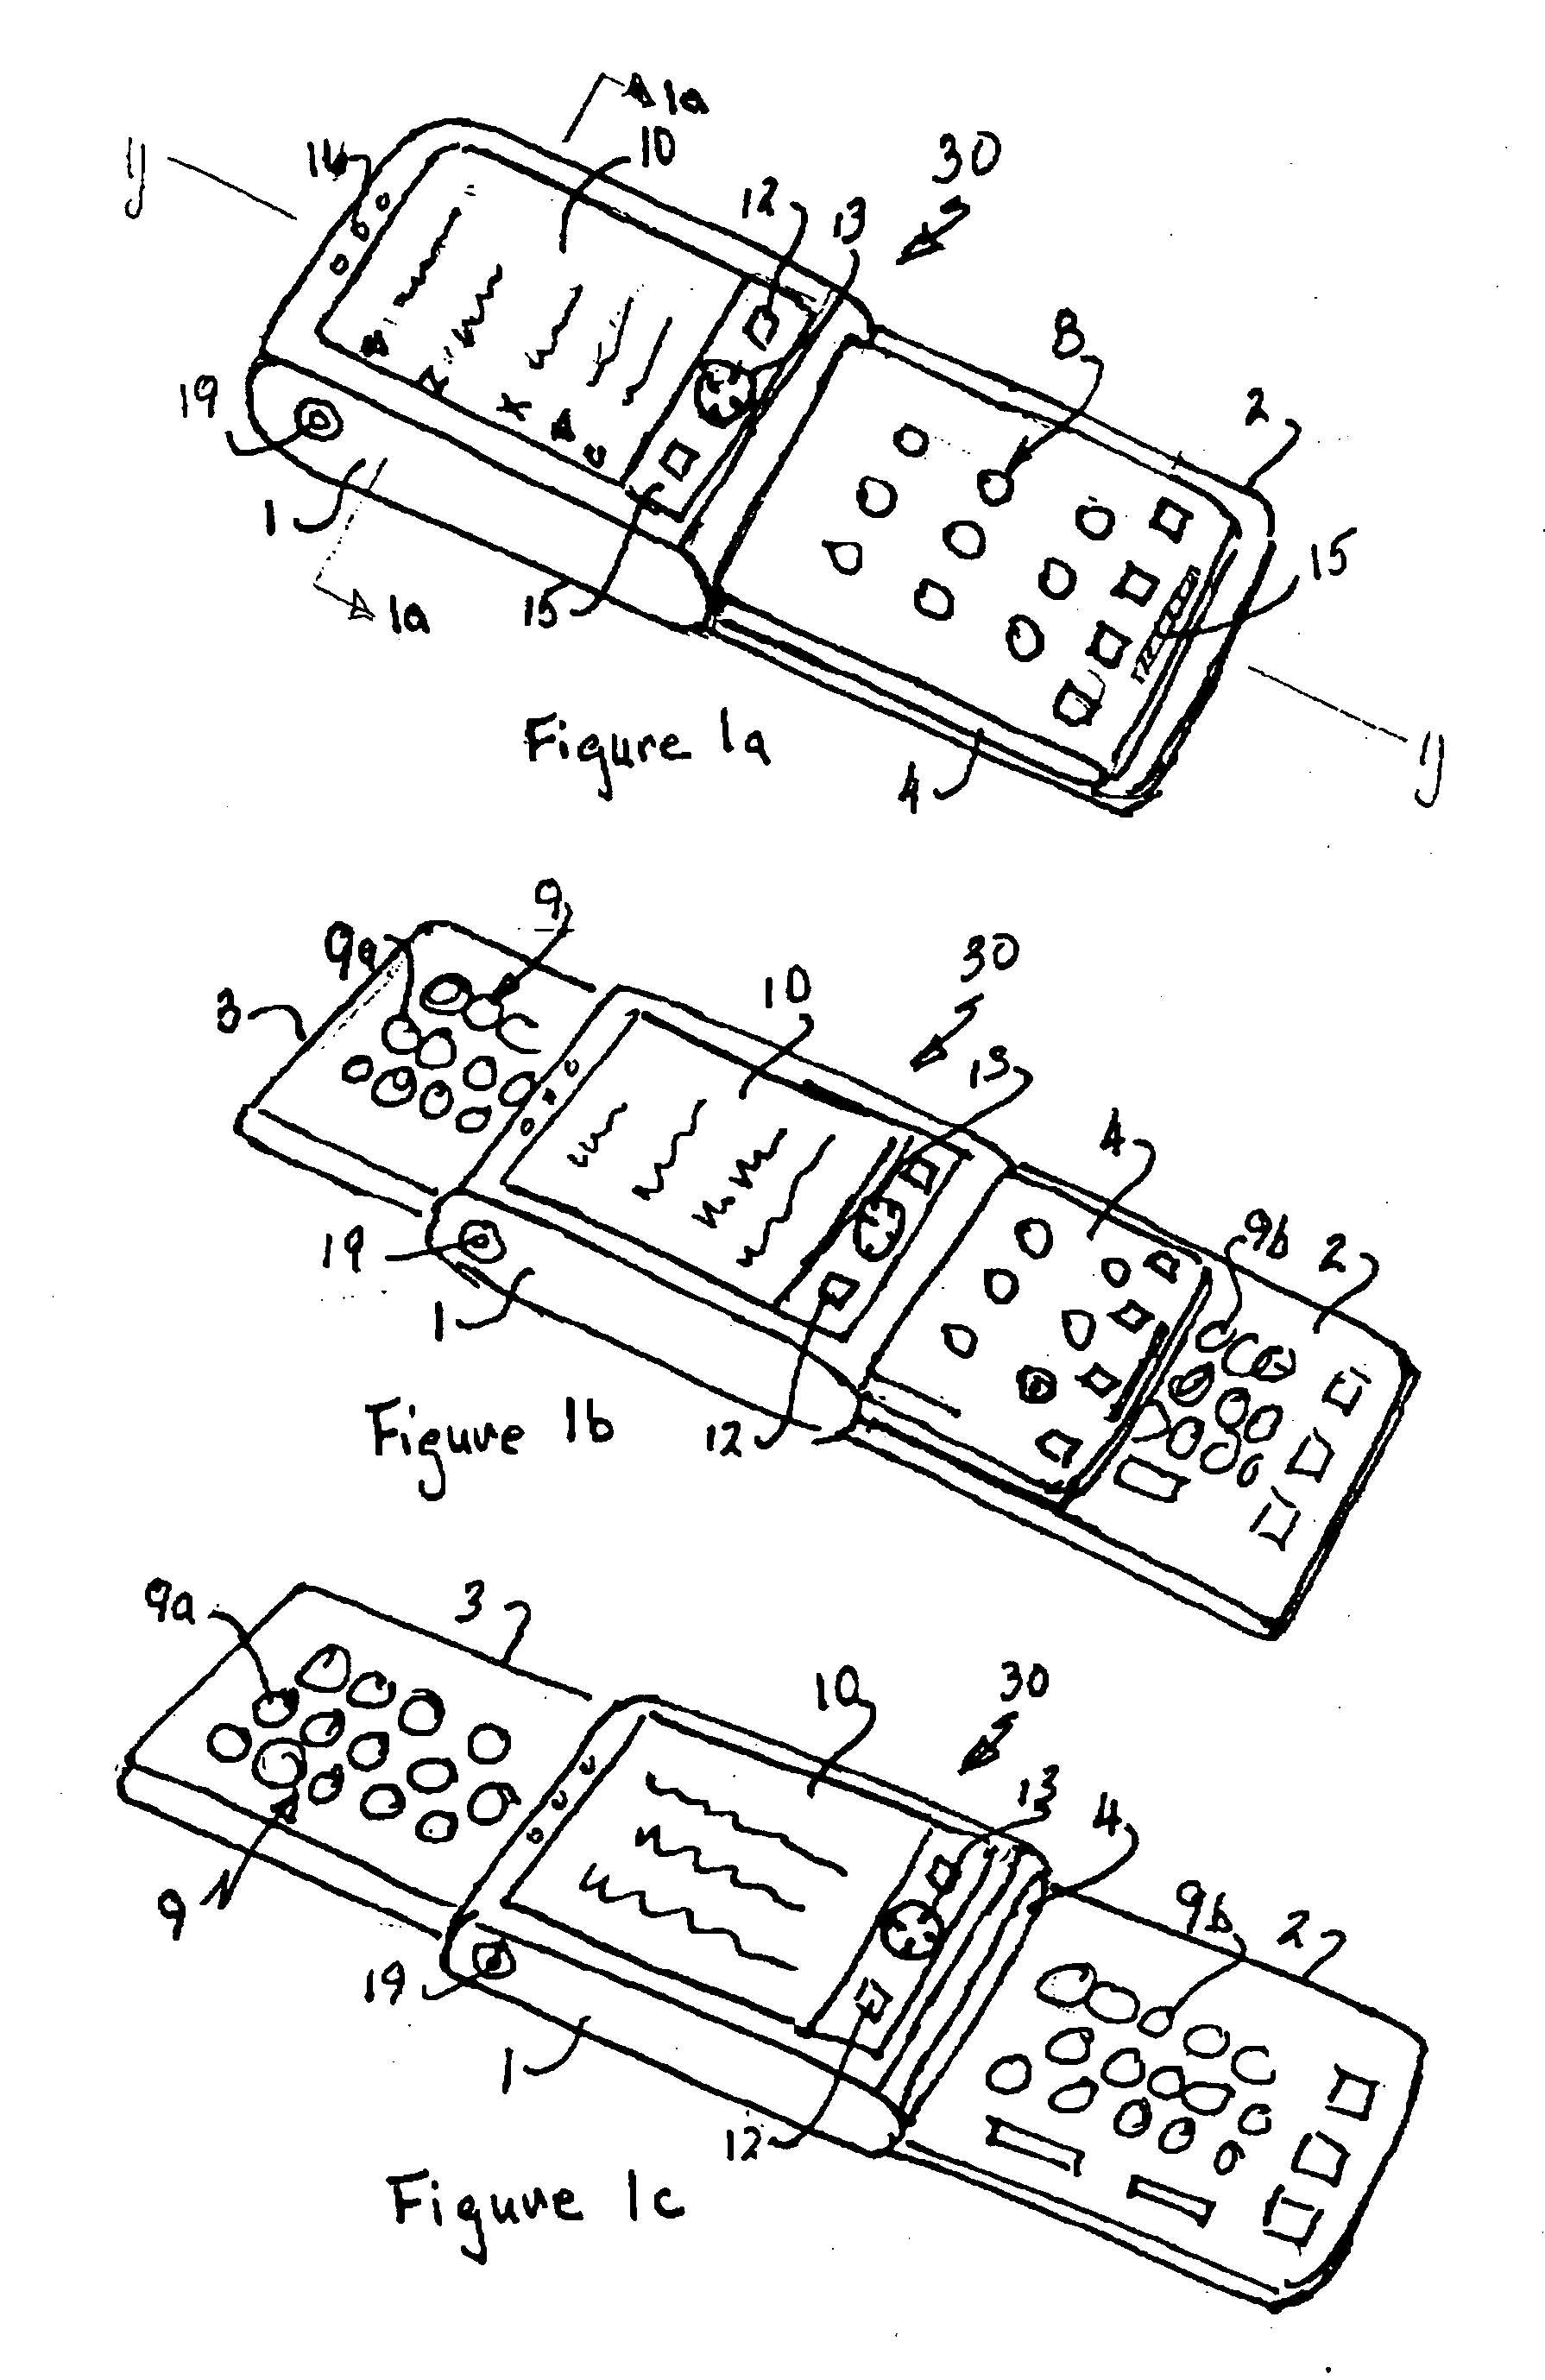 Multi-function electronic device with nested sliding panels